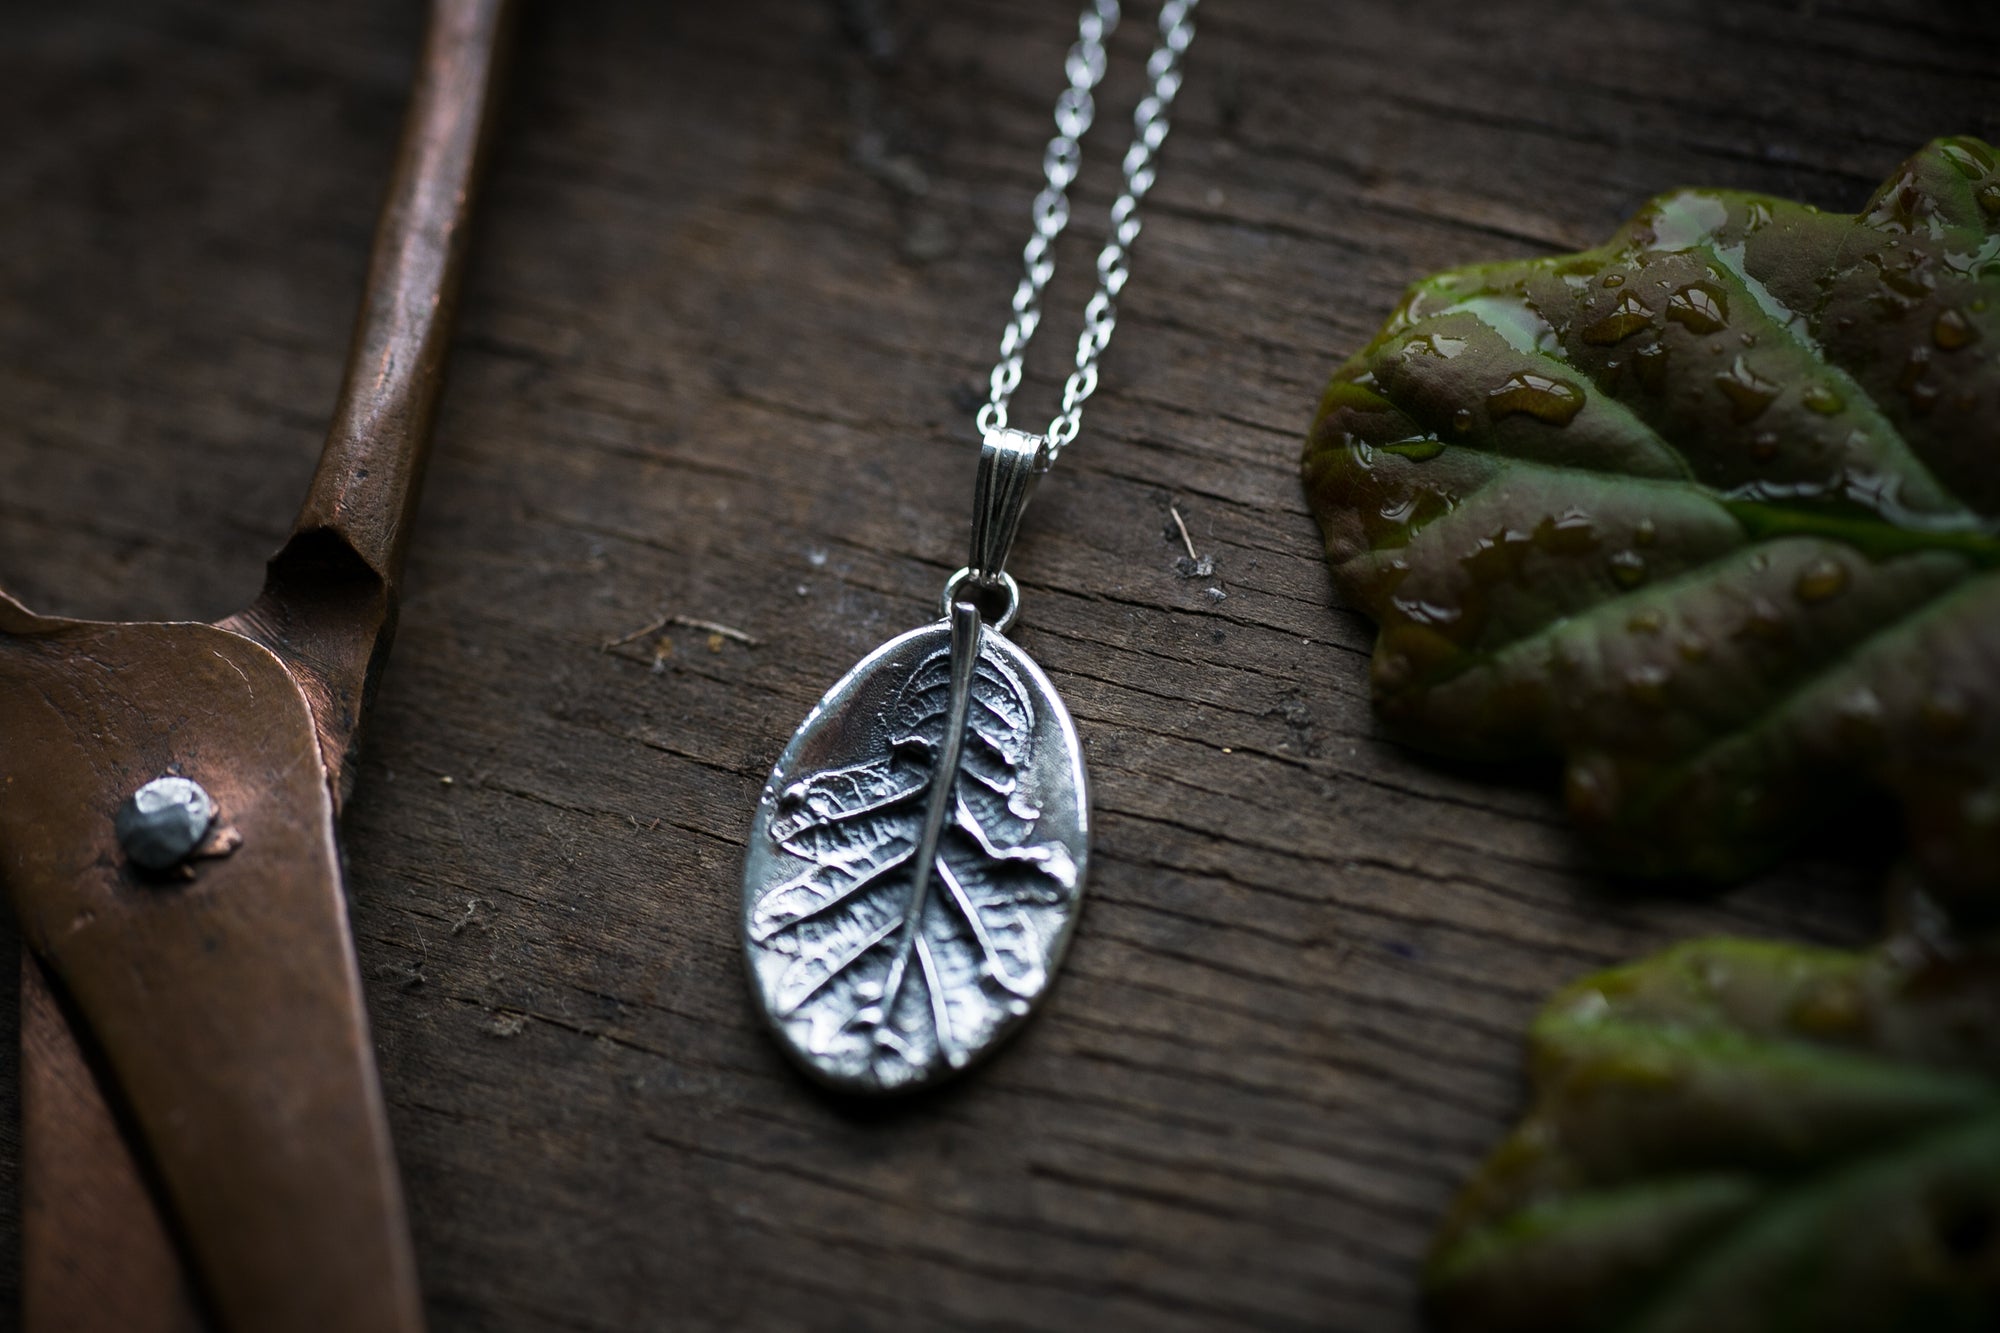 Oak leaf pendant ~ For Bravery, Strength, Growth & Patience